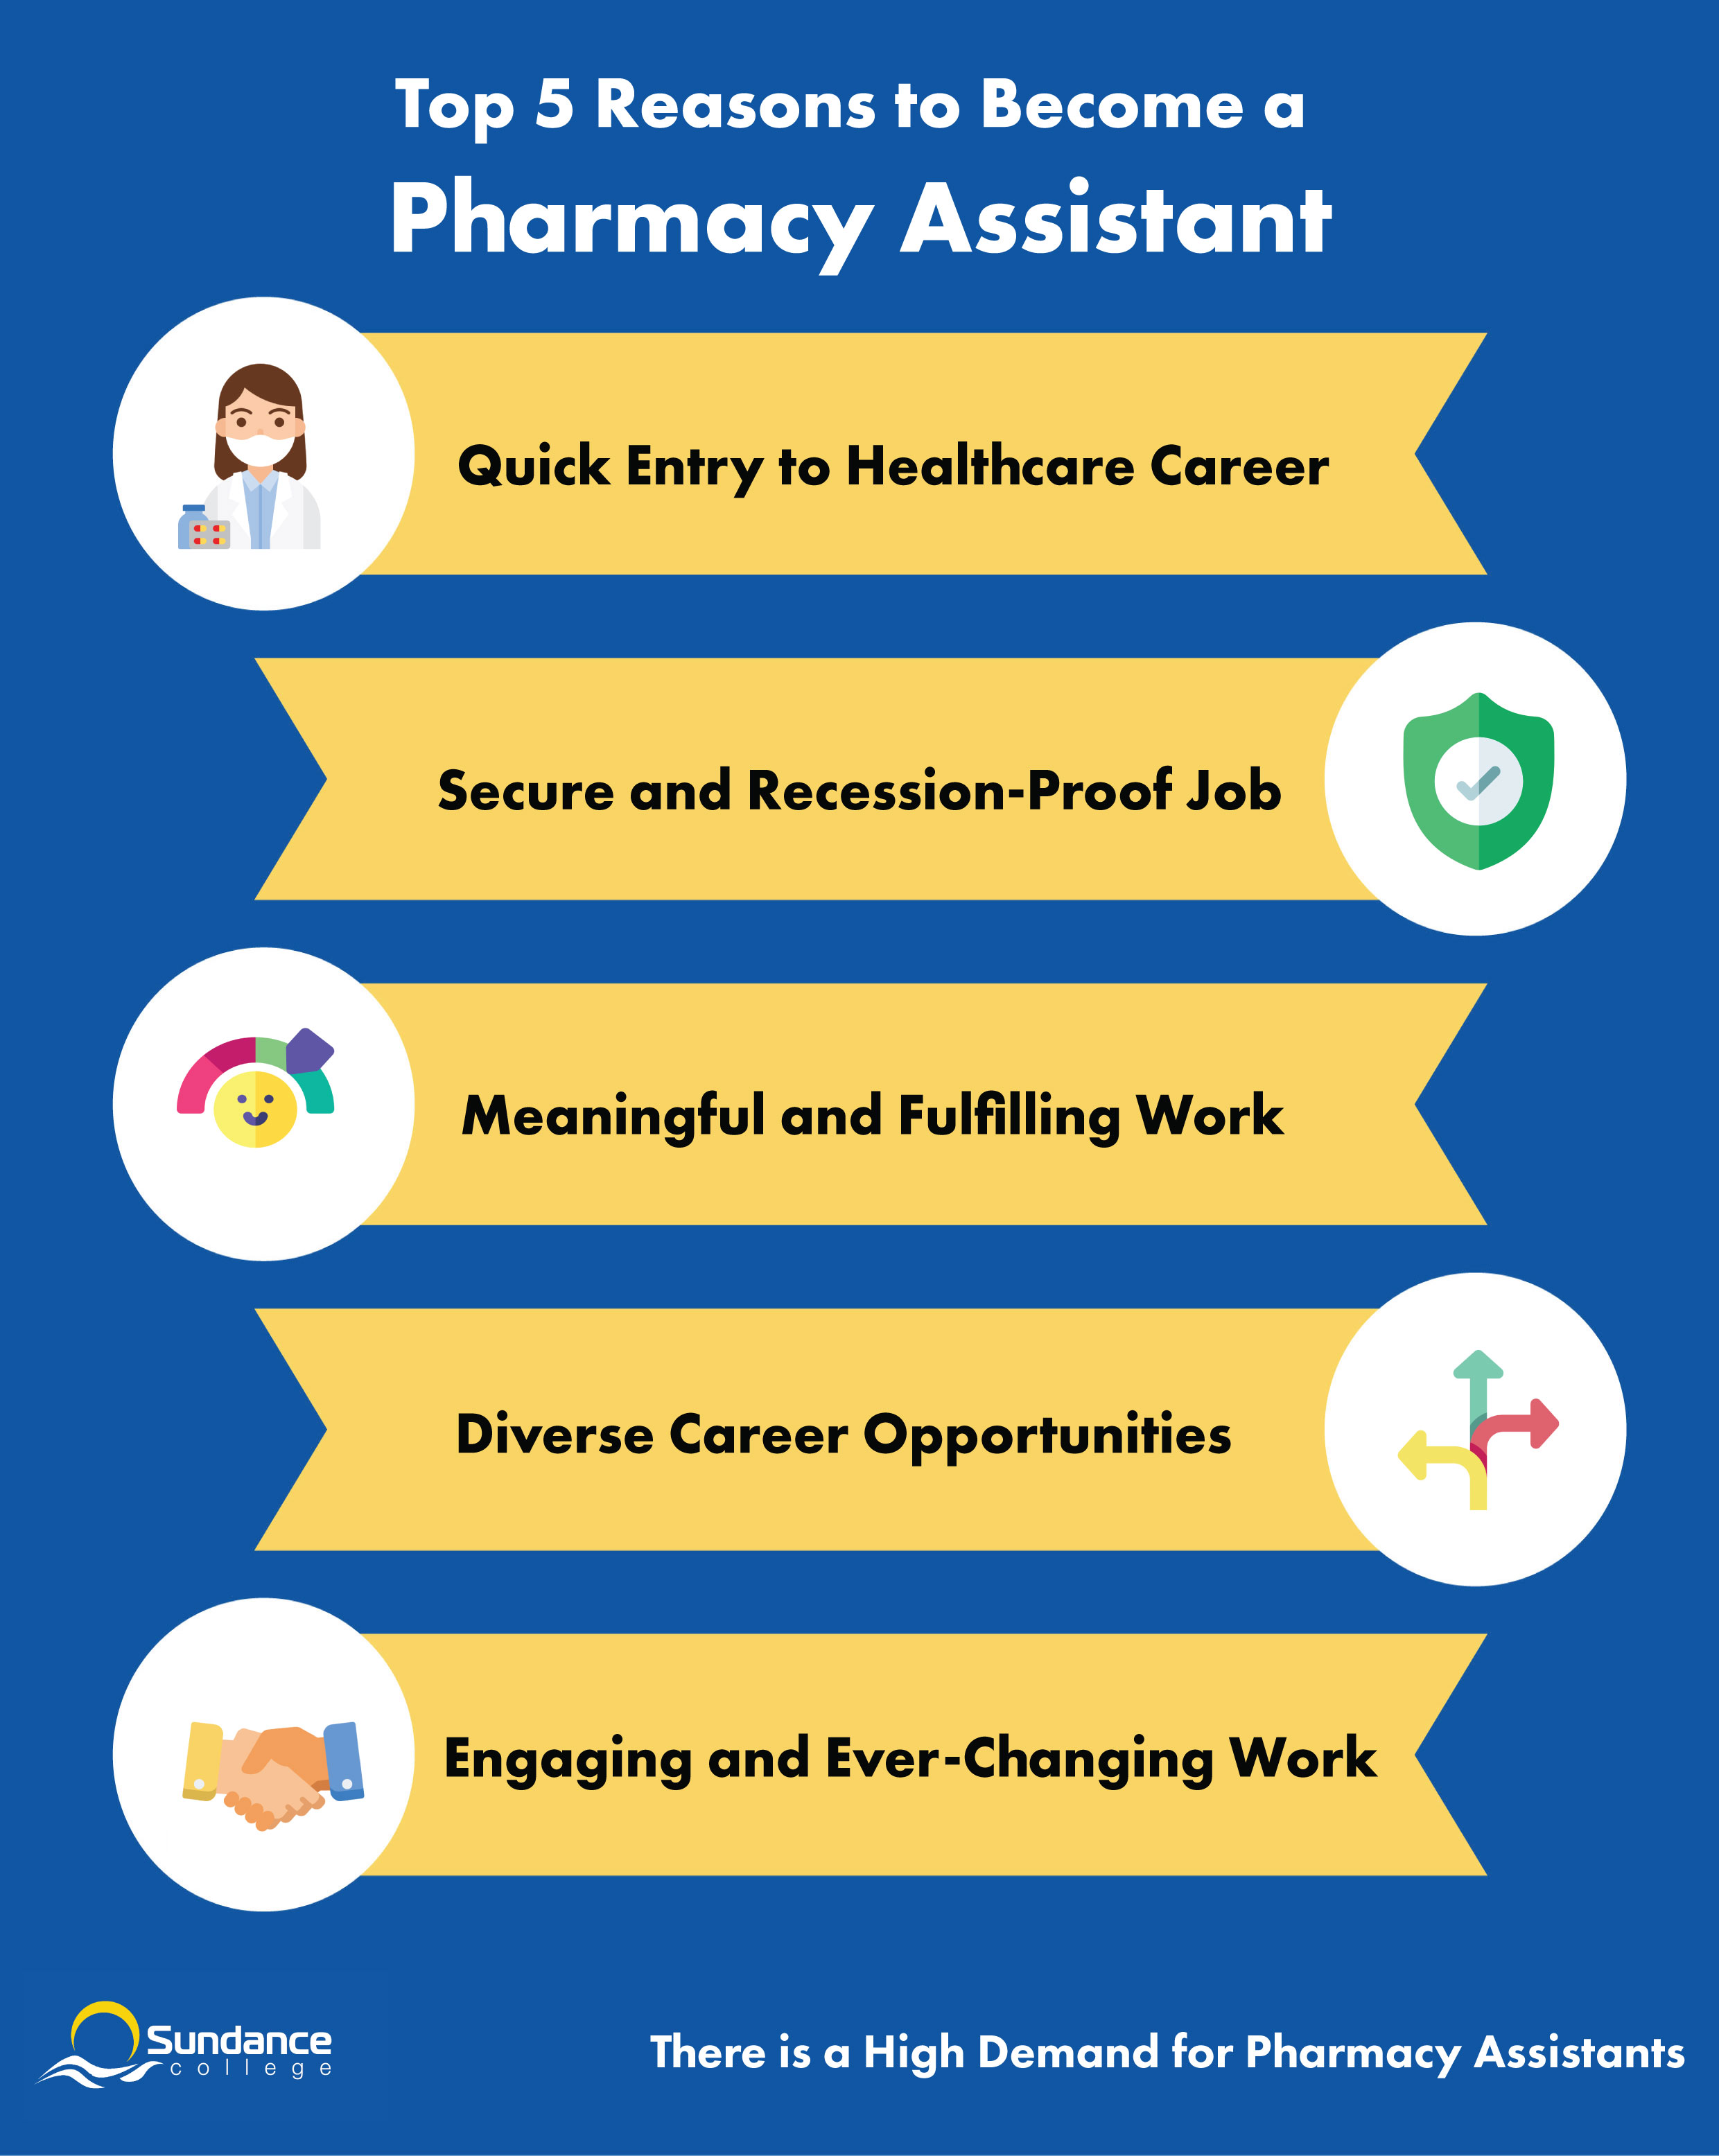  An infographics showcasing the five reasons to become a pharmacy assistant including quick entry to healthcare career, secure and recession-proof job, meaningful and fulfilling work, diverse career opportunities, and engaging and ever-changing work.